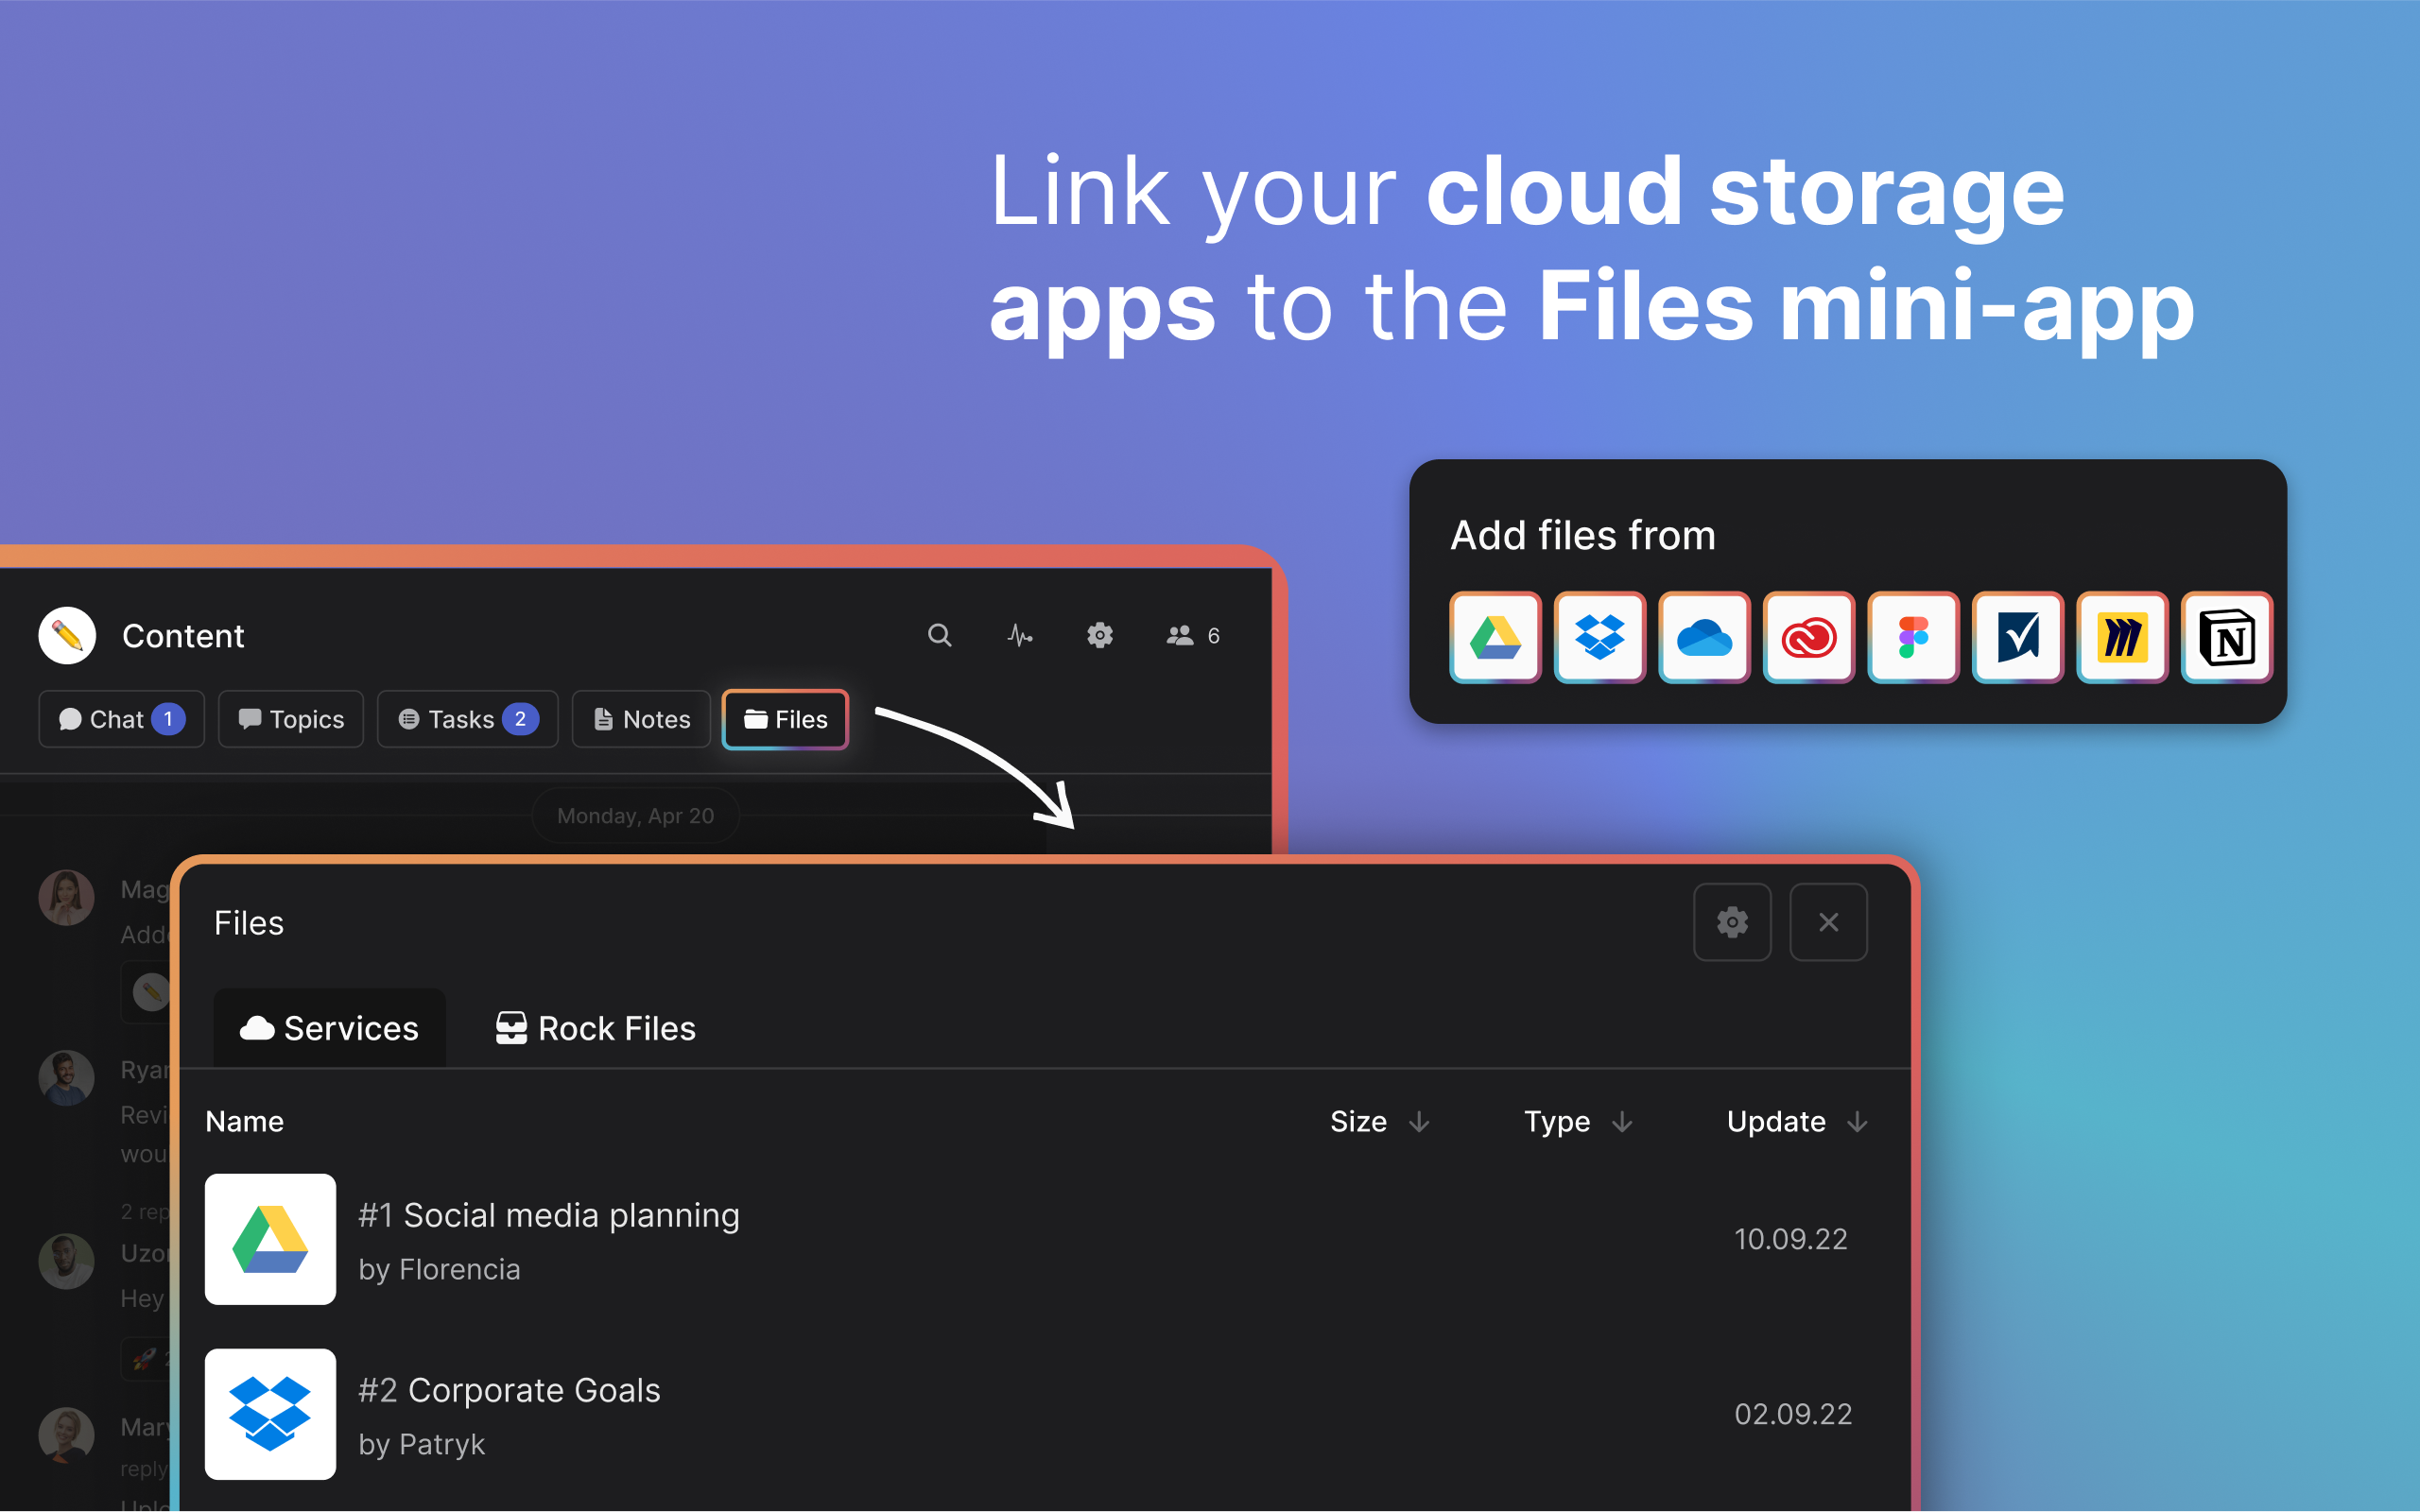 Integrate with cloud storage providers such as Google Drive, Dropbox, Notion, Figma, Miro and many others. Integrate your cloud files into your tasks, notes and topics to make documentation a seamless experience.